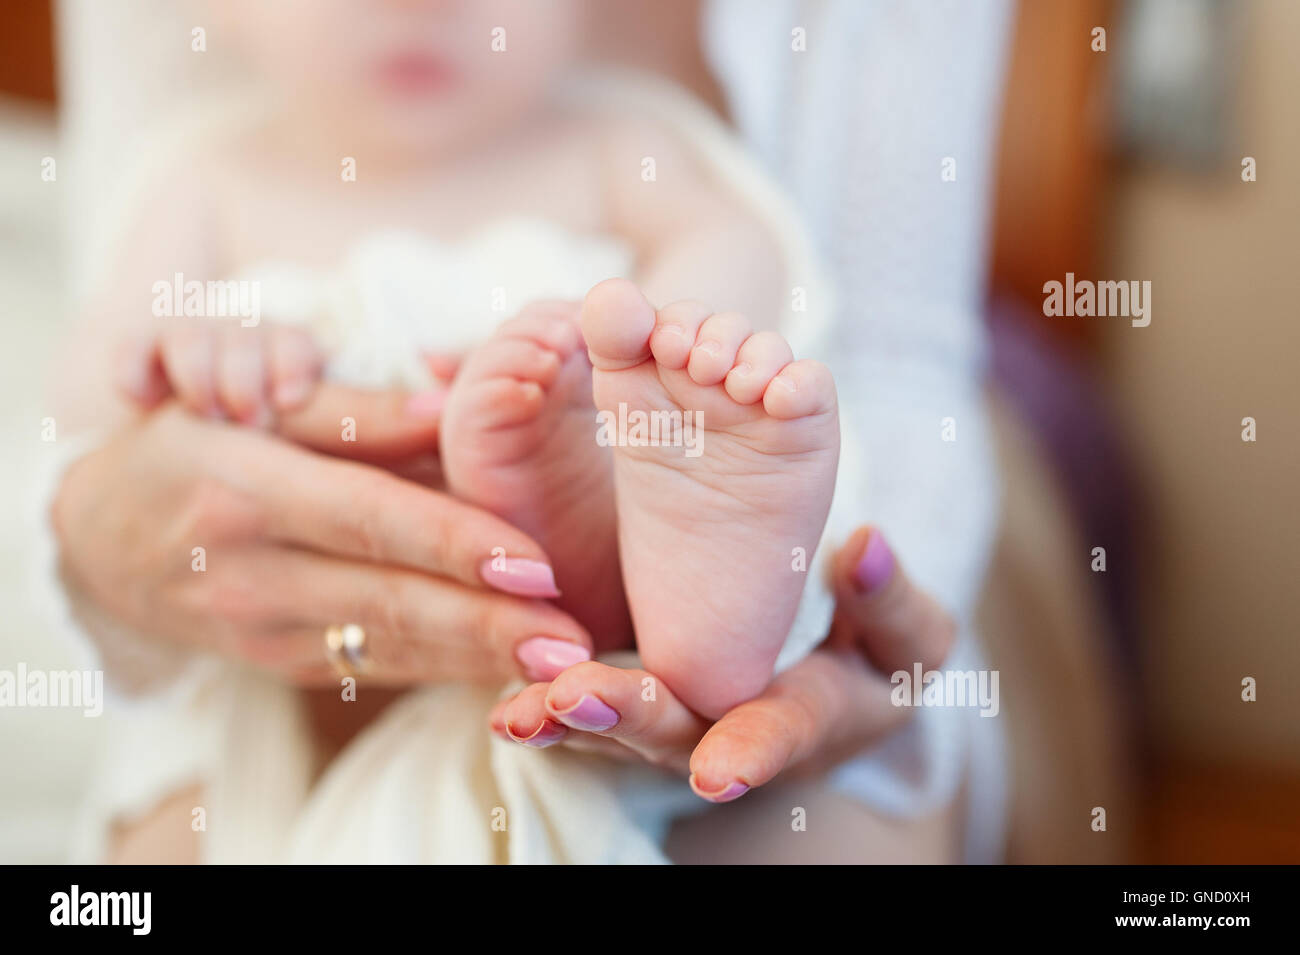 Mother holding little baby's feet on bed Banque D'Images